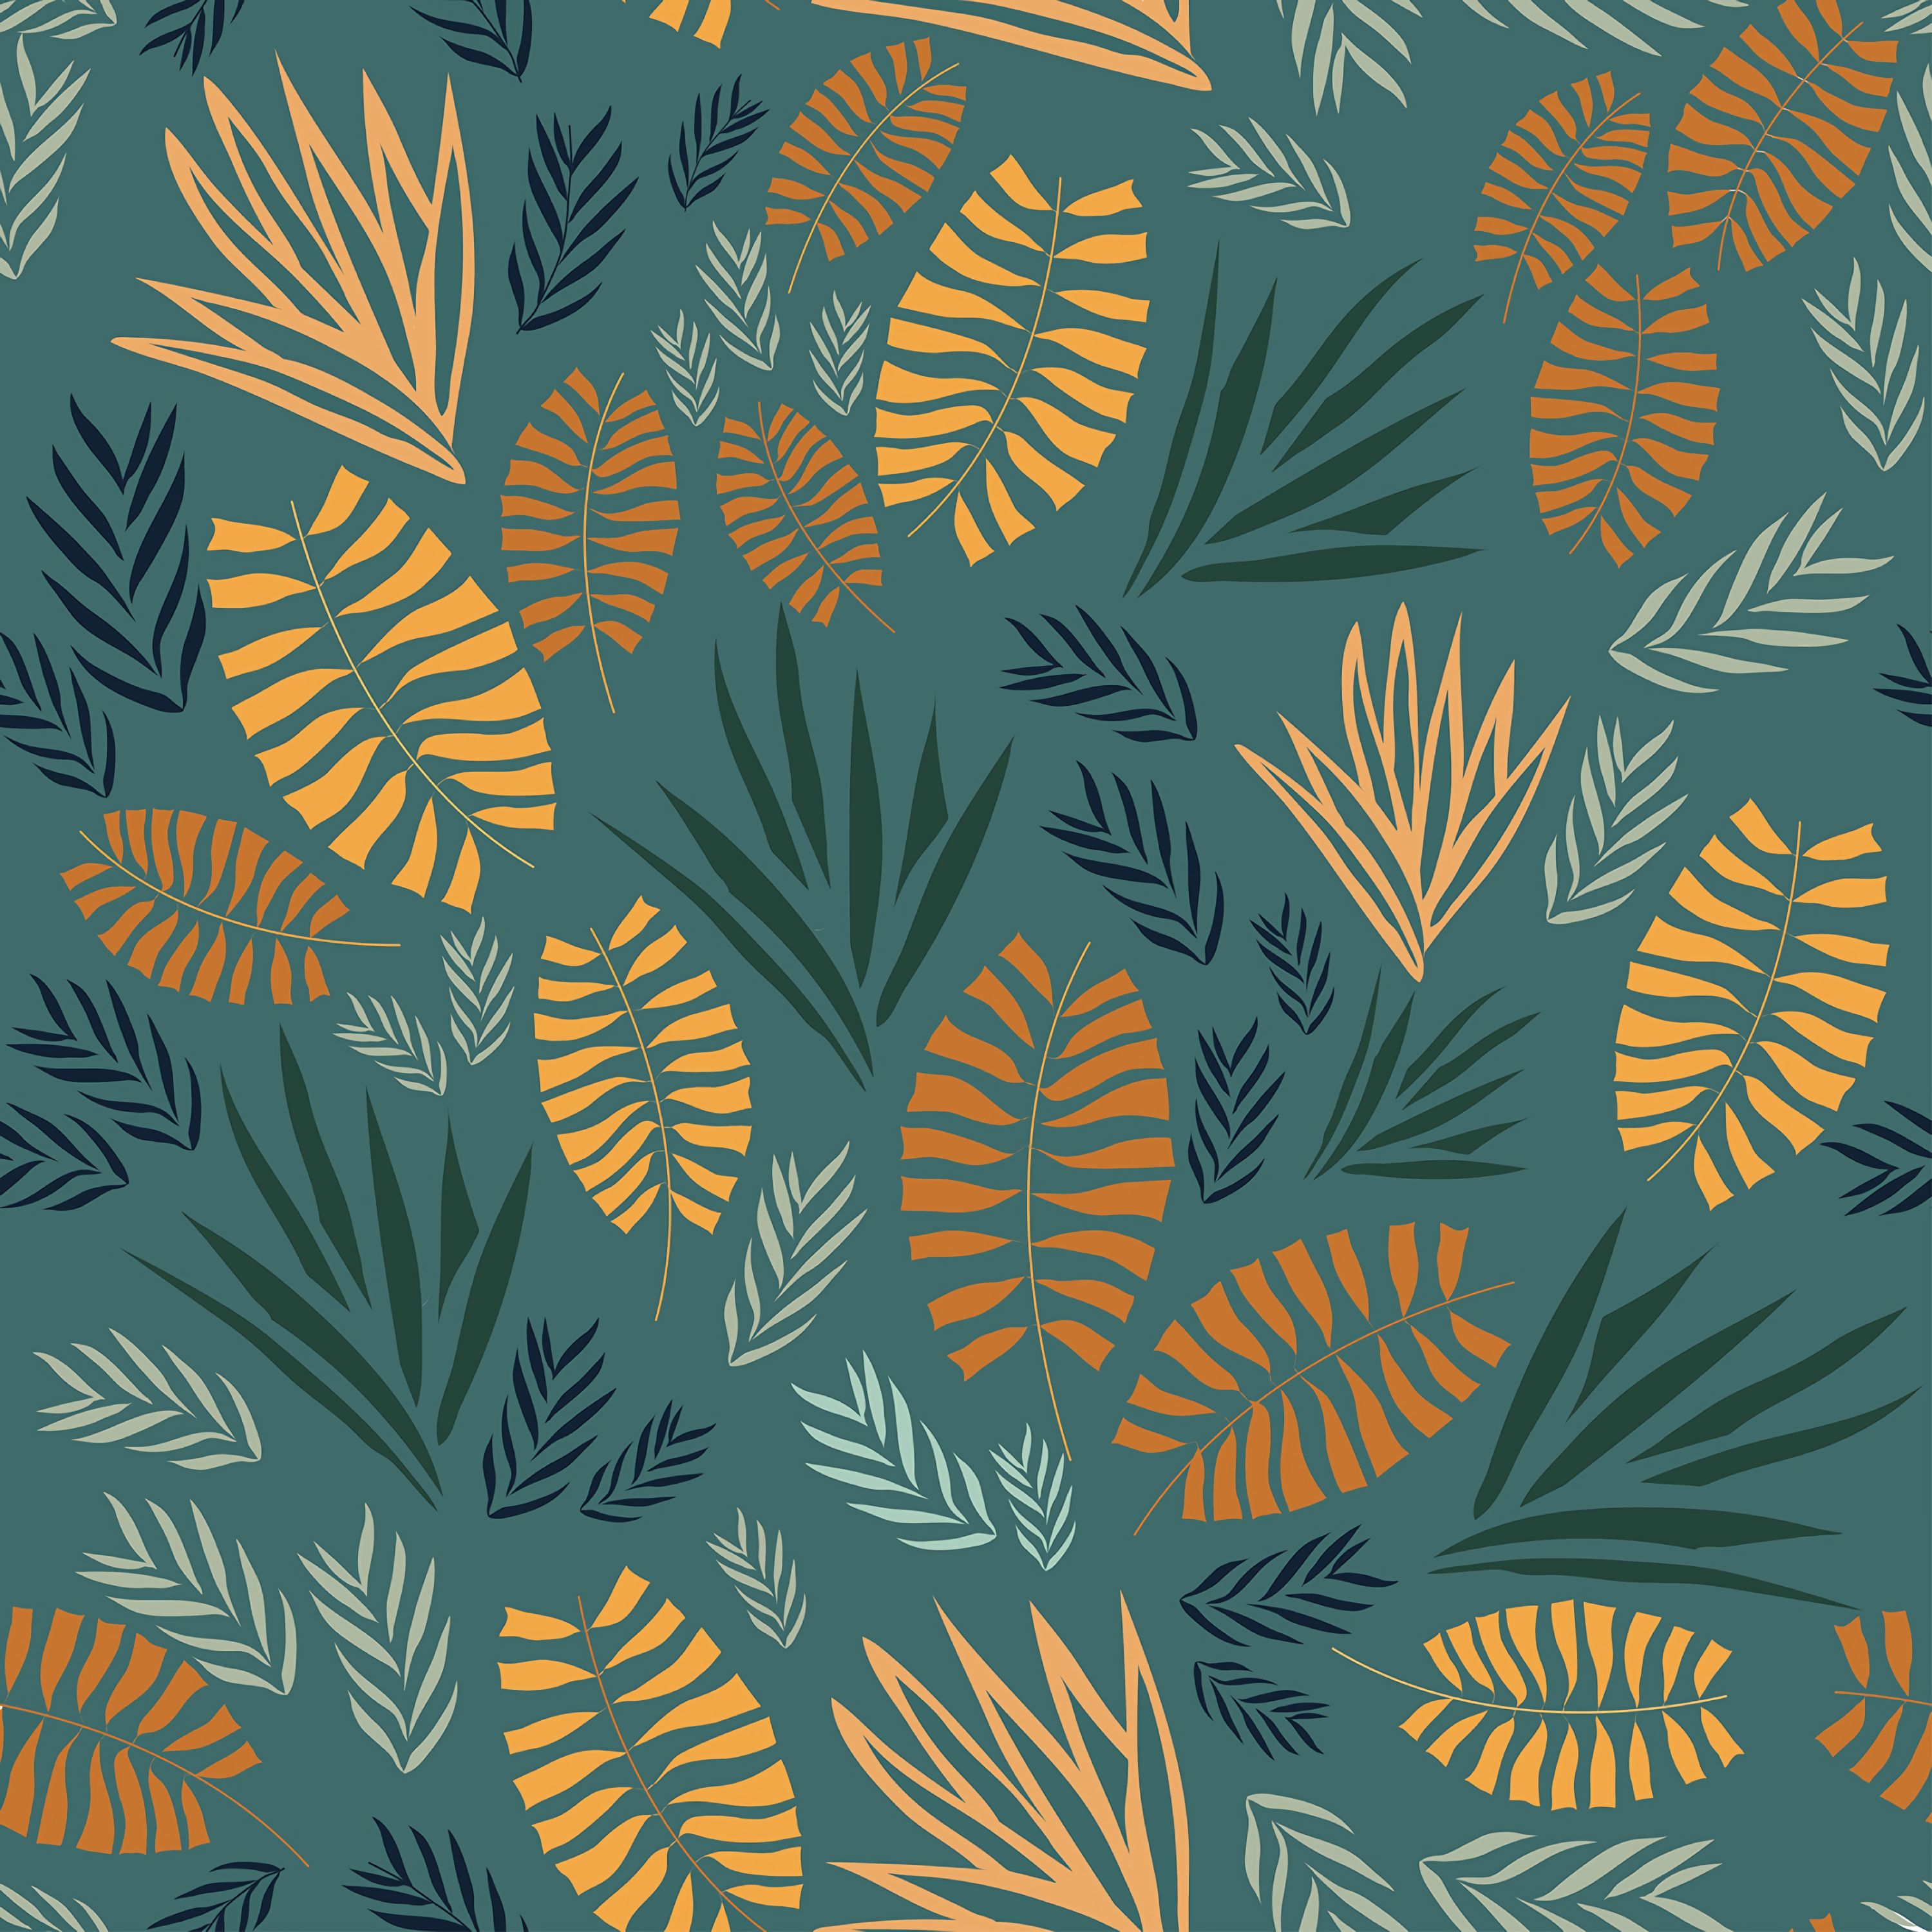 textures, patterns, leaves, plants, pattern, texture iphone wallpaper